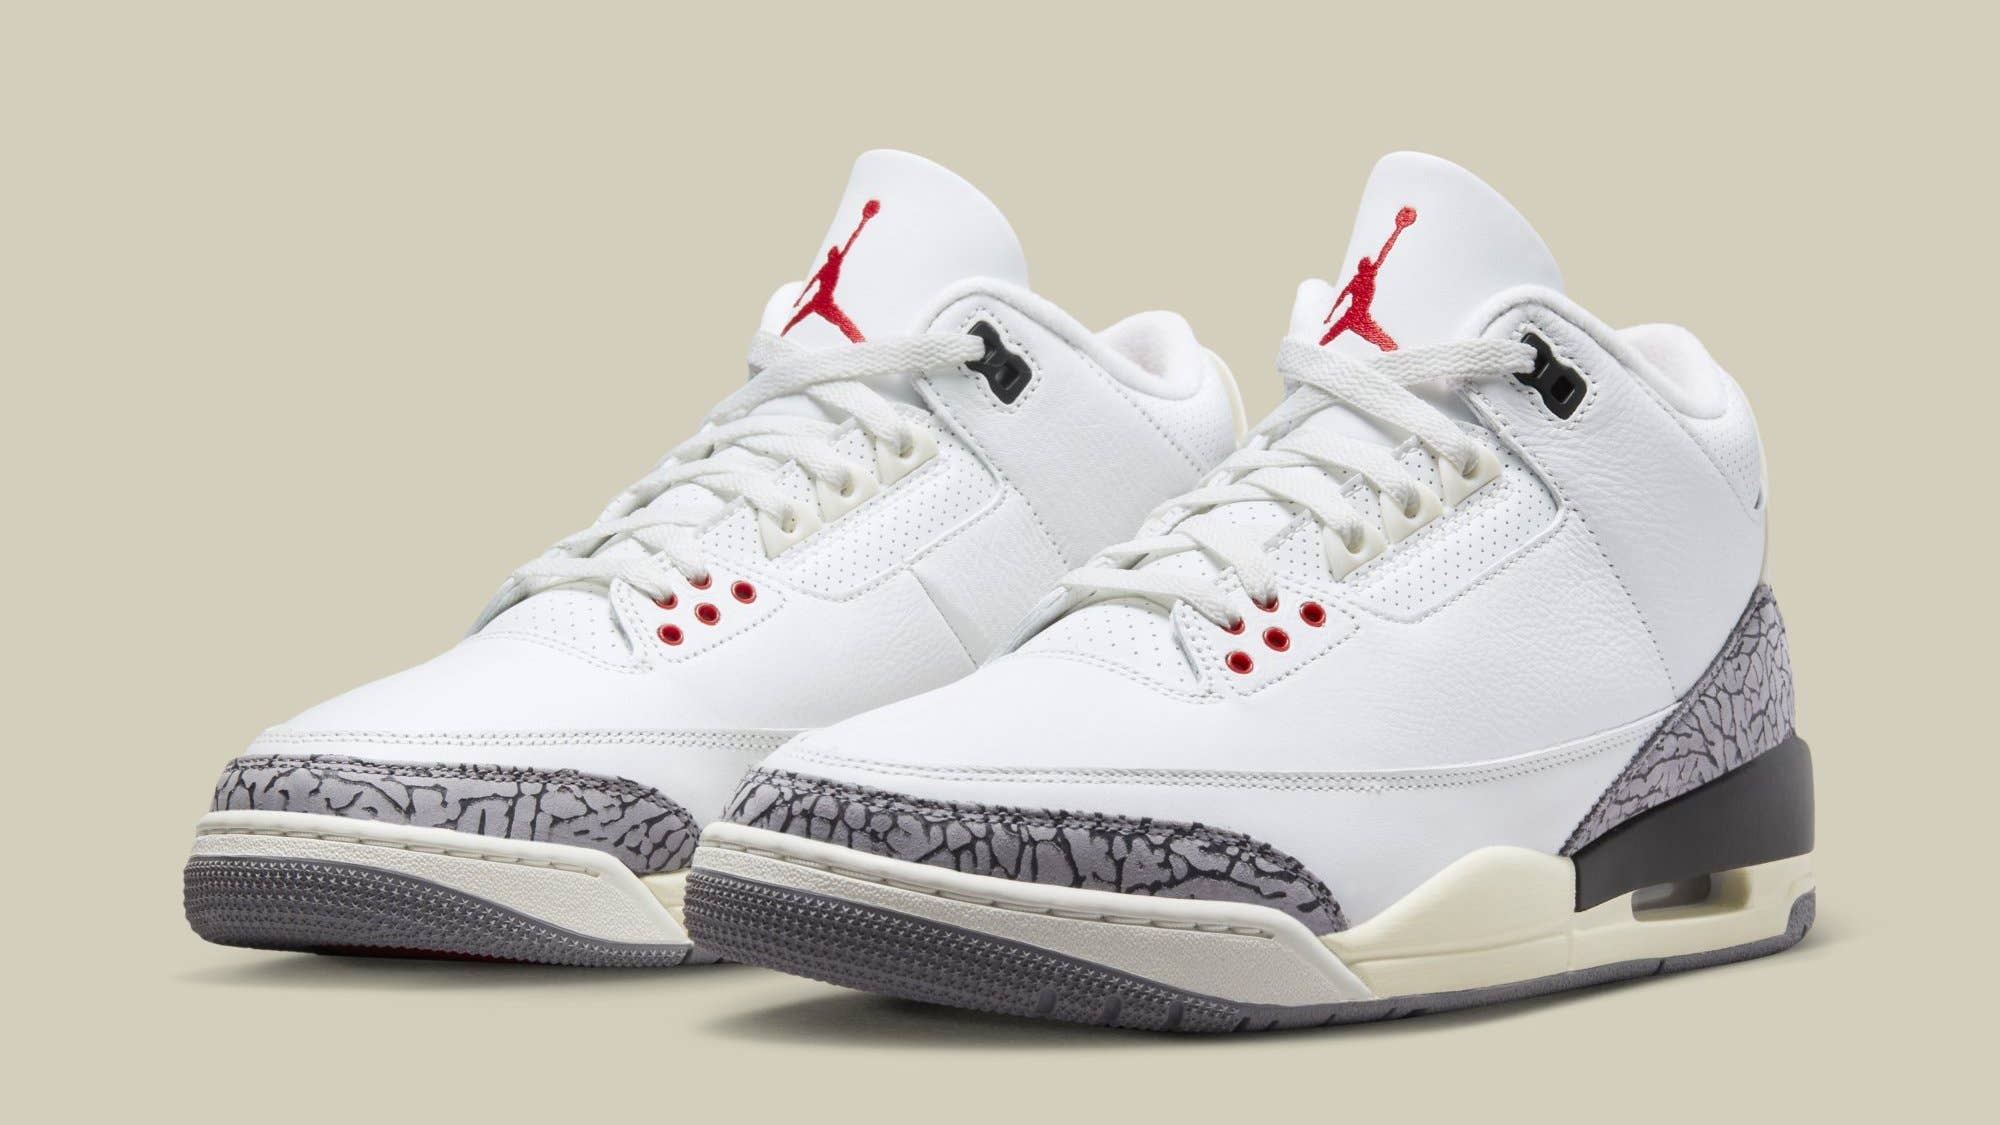 How Nike Is Releasing the Air Jordan 3 'White Cement Reimagined